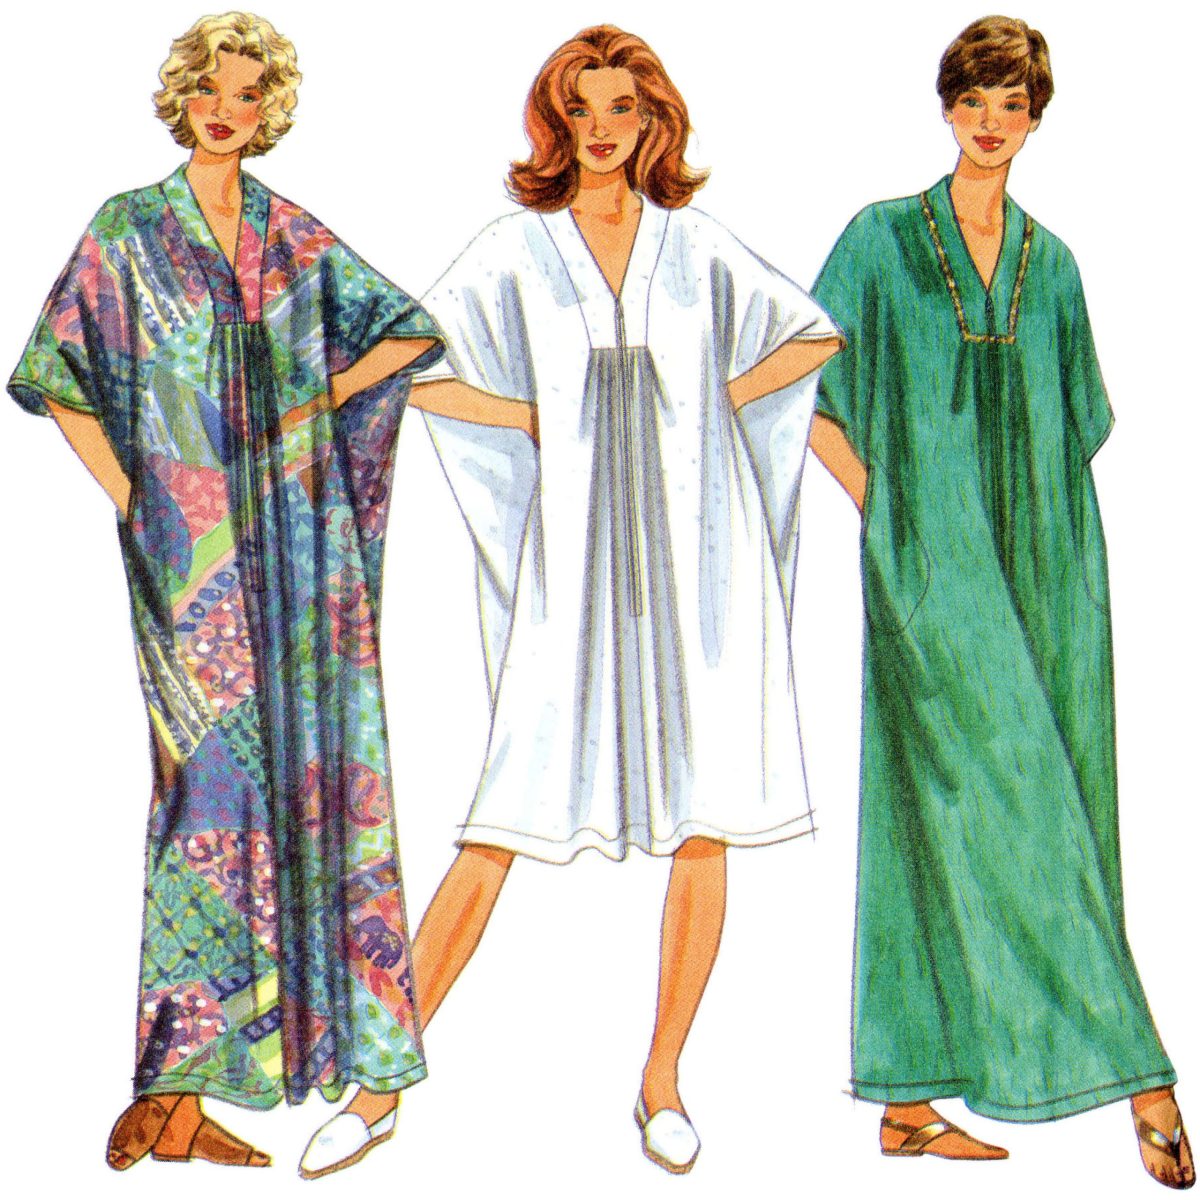 Simplicity Sewing Pattern S8876 Misses'/Women's Vintage Dress and Stole